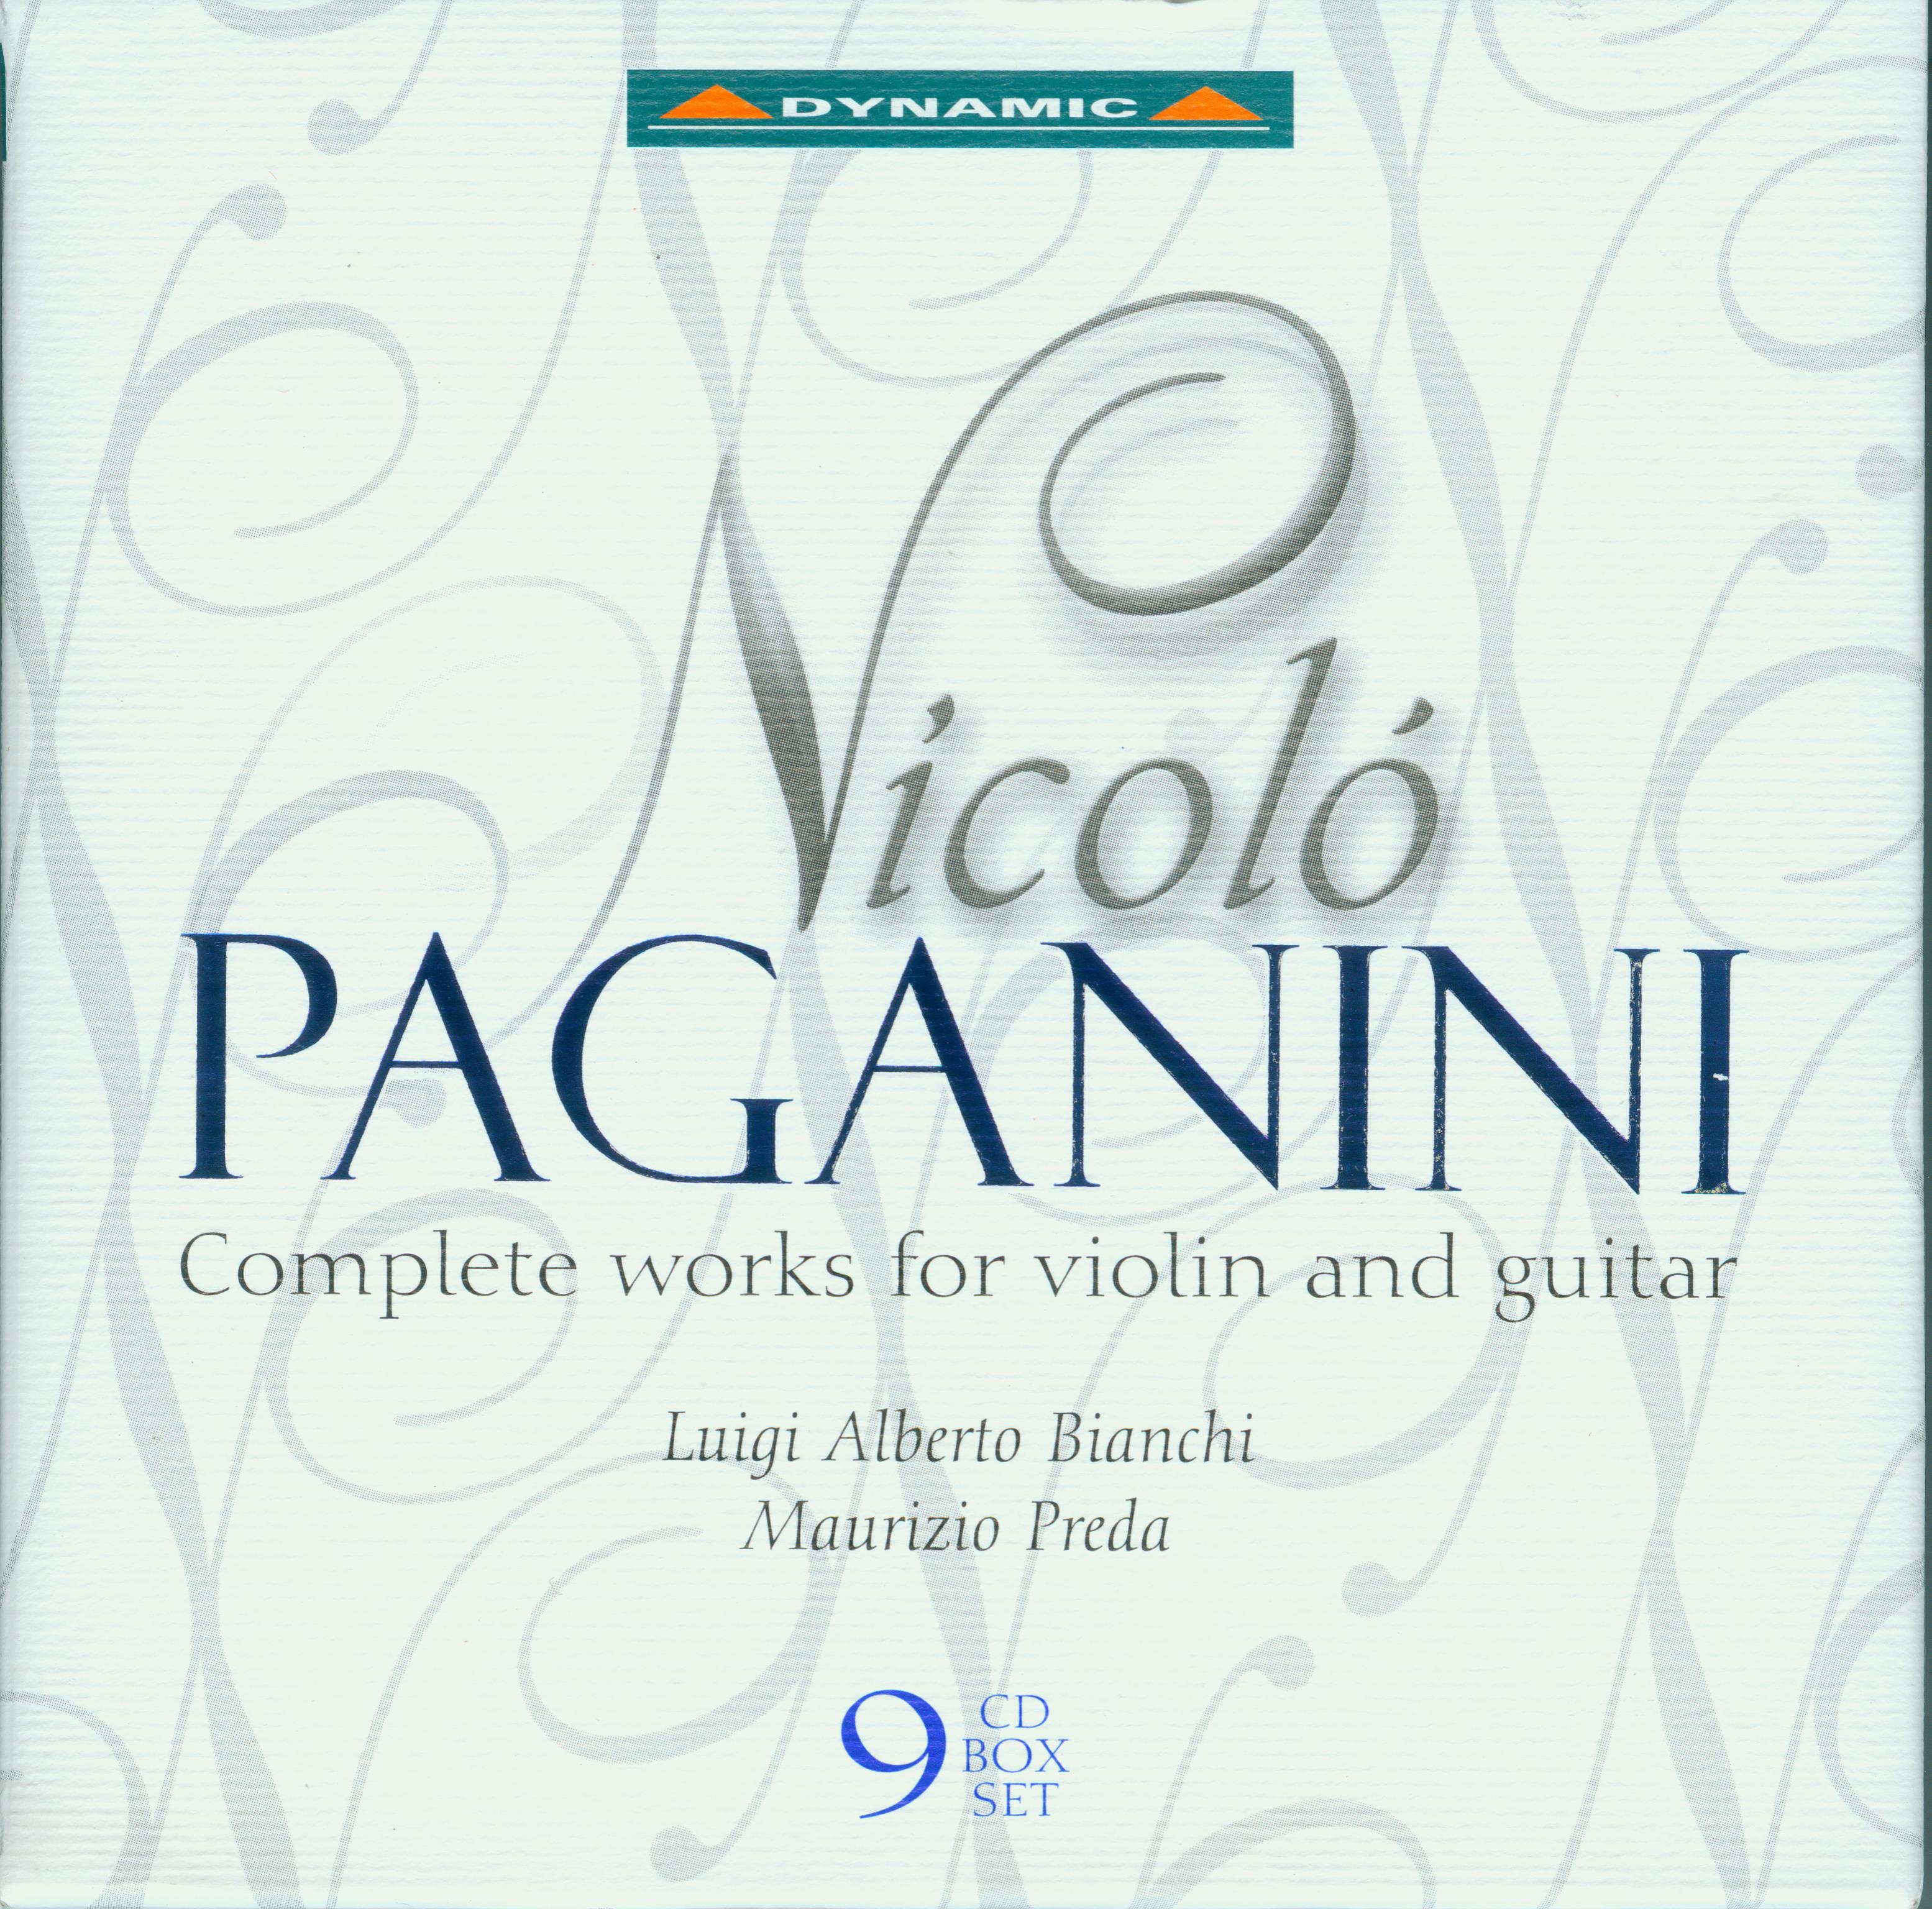 Paganini Complete Works for Violin and Guitar 8cd